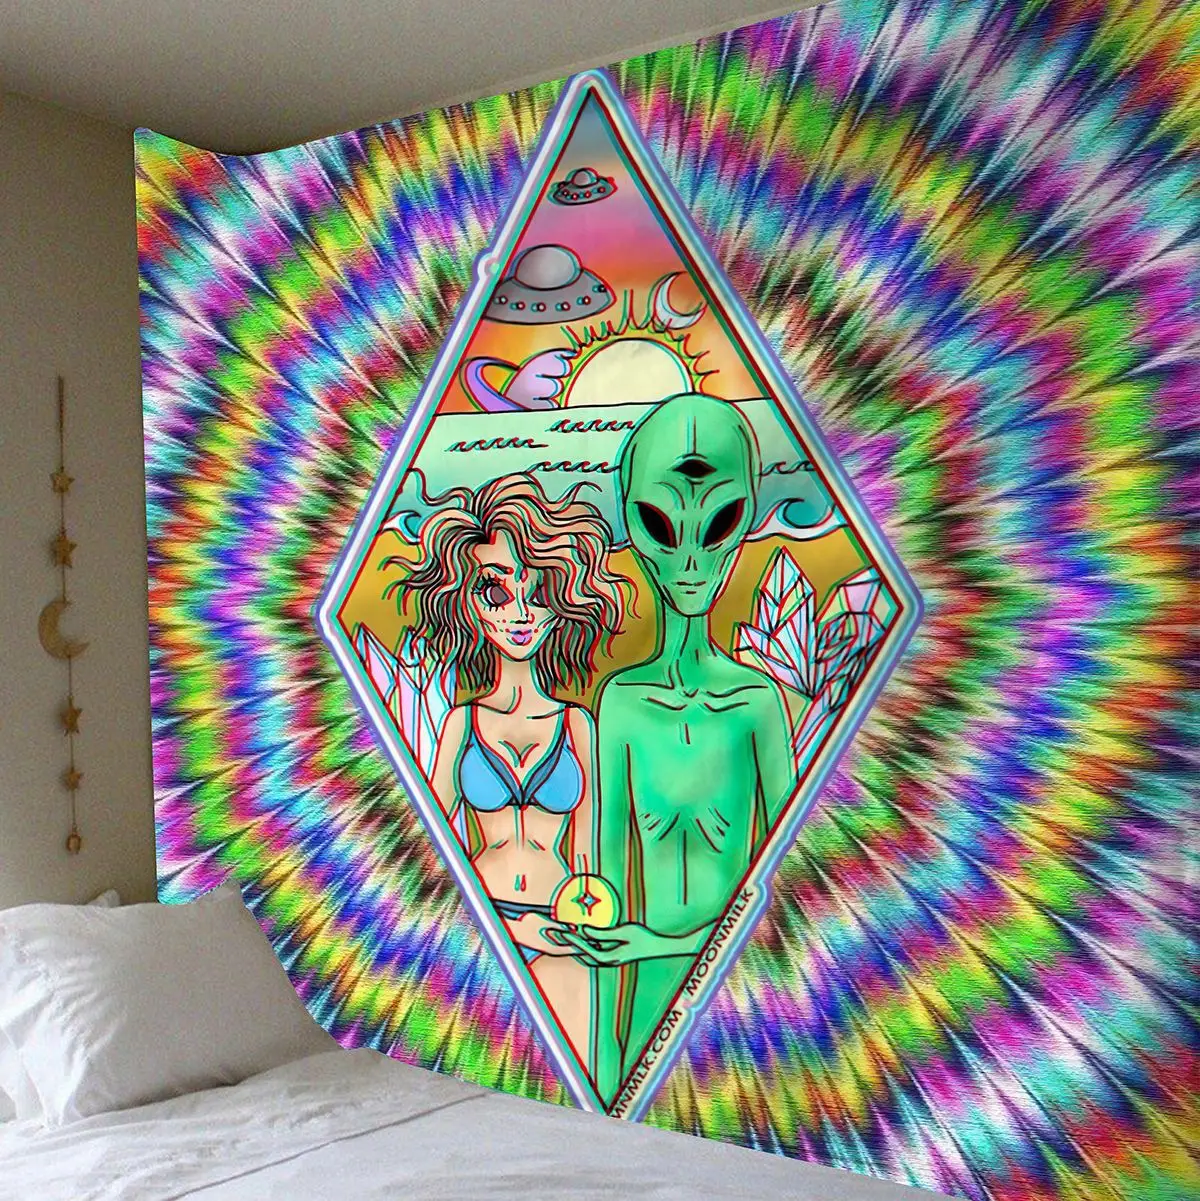 Play Alien Psychedelic Tapestry Mandala Wall Hanging BohAan Decoration Hippie Wi - £23.12 GBP